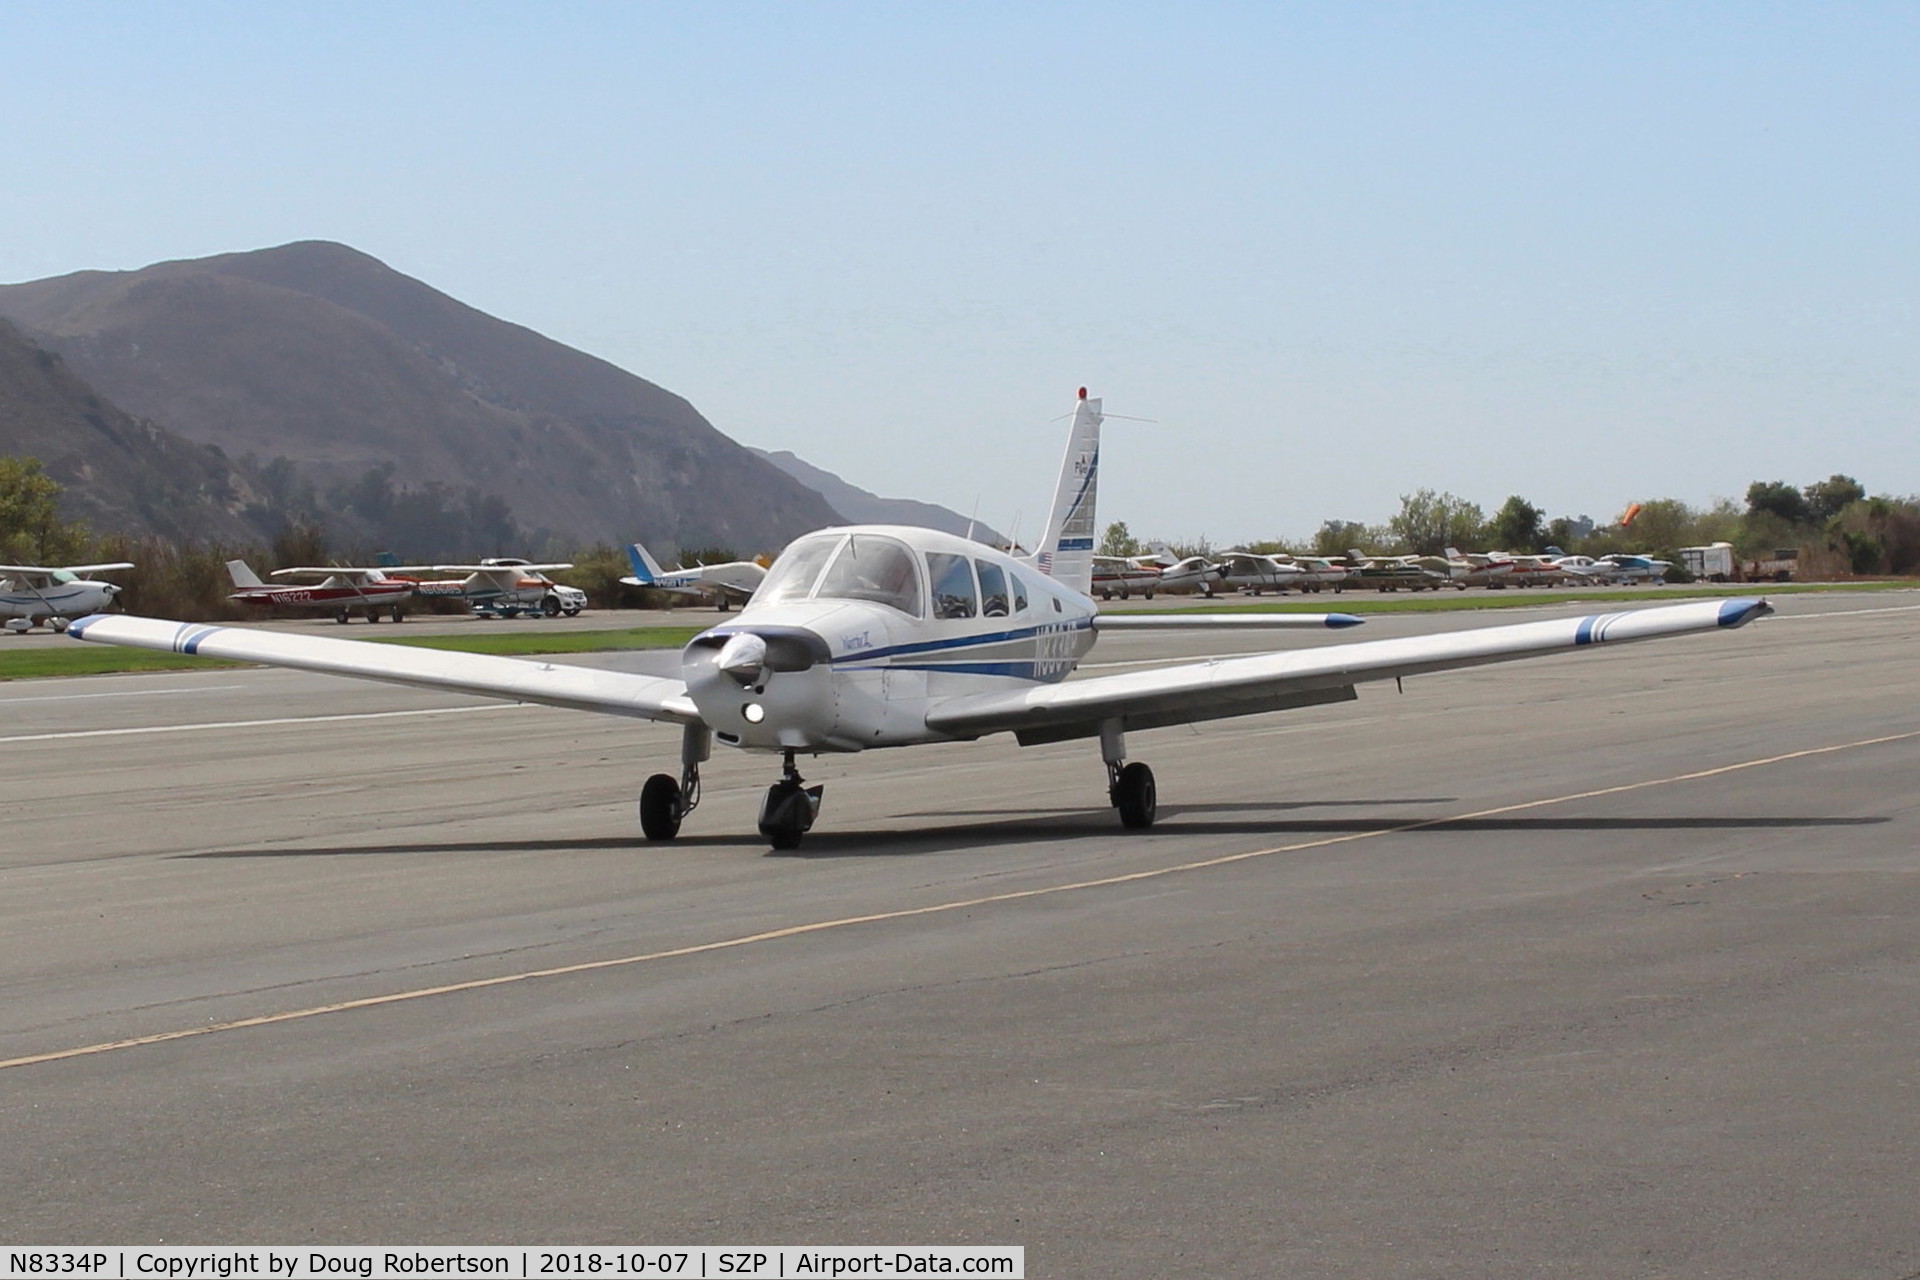 N8334P, 1981 Piper PA-28-161 C/N 28-8116149, 1981 Piper PA-28-161 WARRIOR II, Lycoming O-320-D3G 160 hp, taxi back